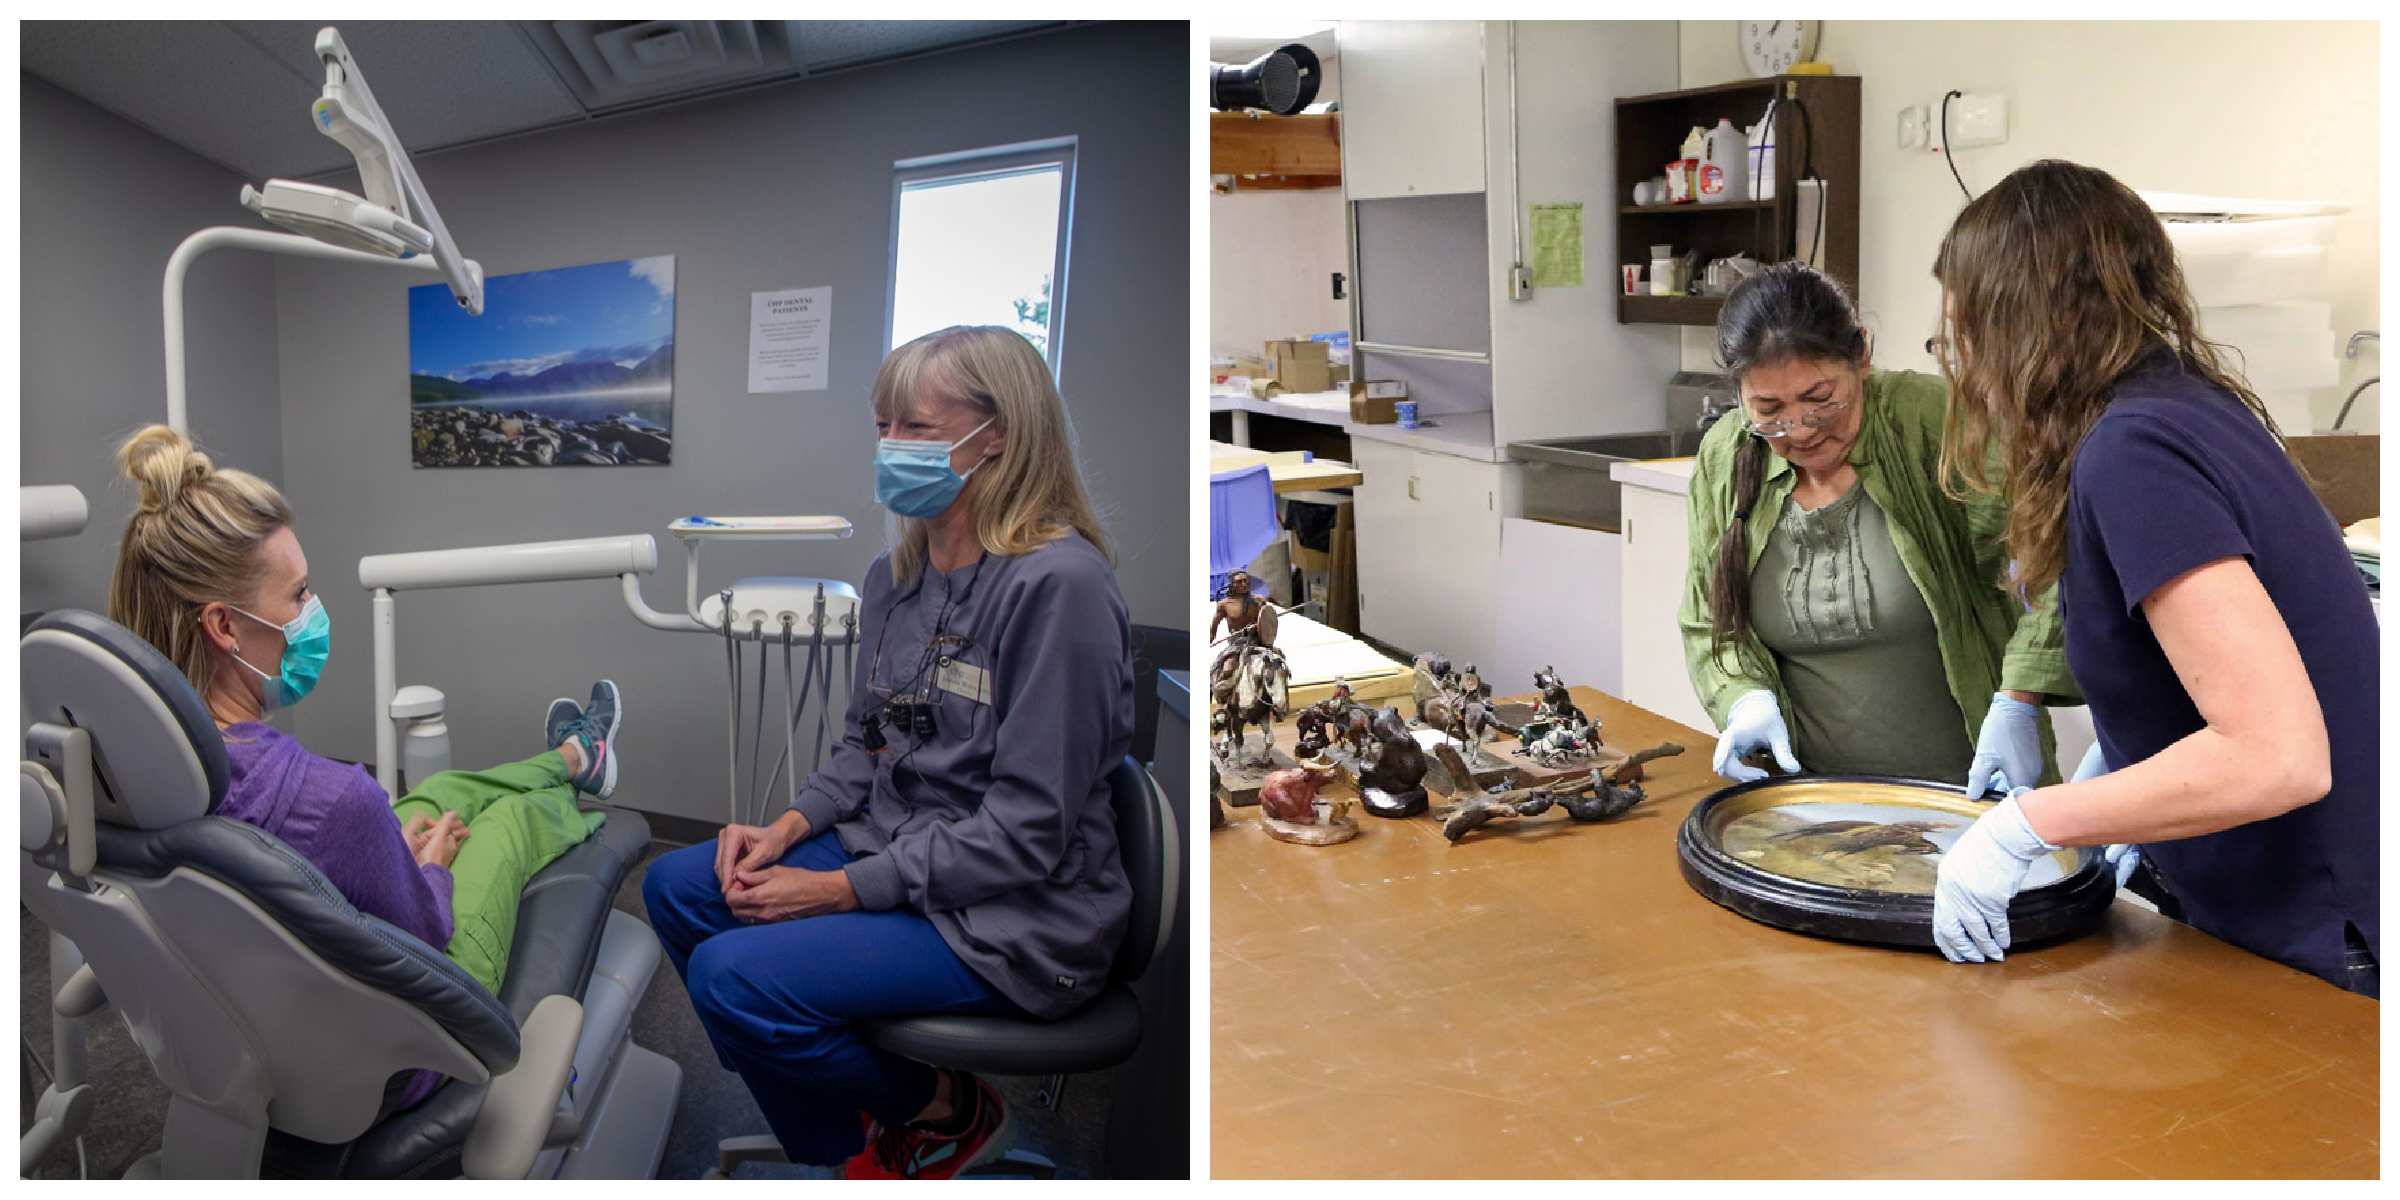 Image 1: a woman and a dental hygienist at the dentist. Image 2: two women work together to frame a painting. 